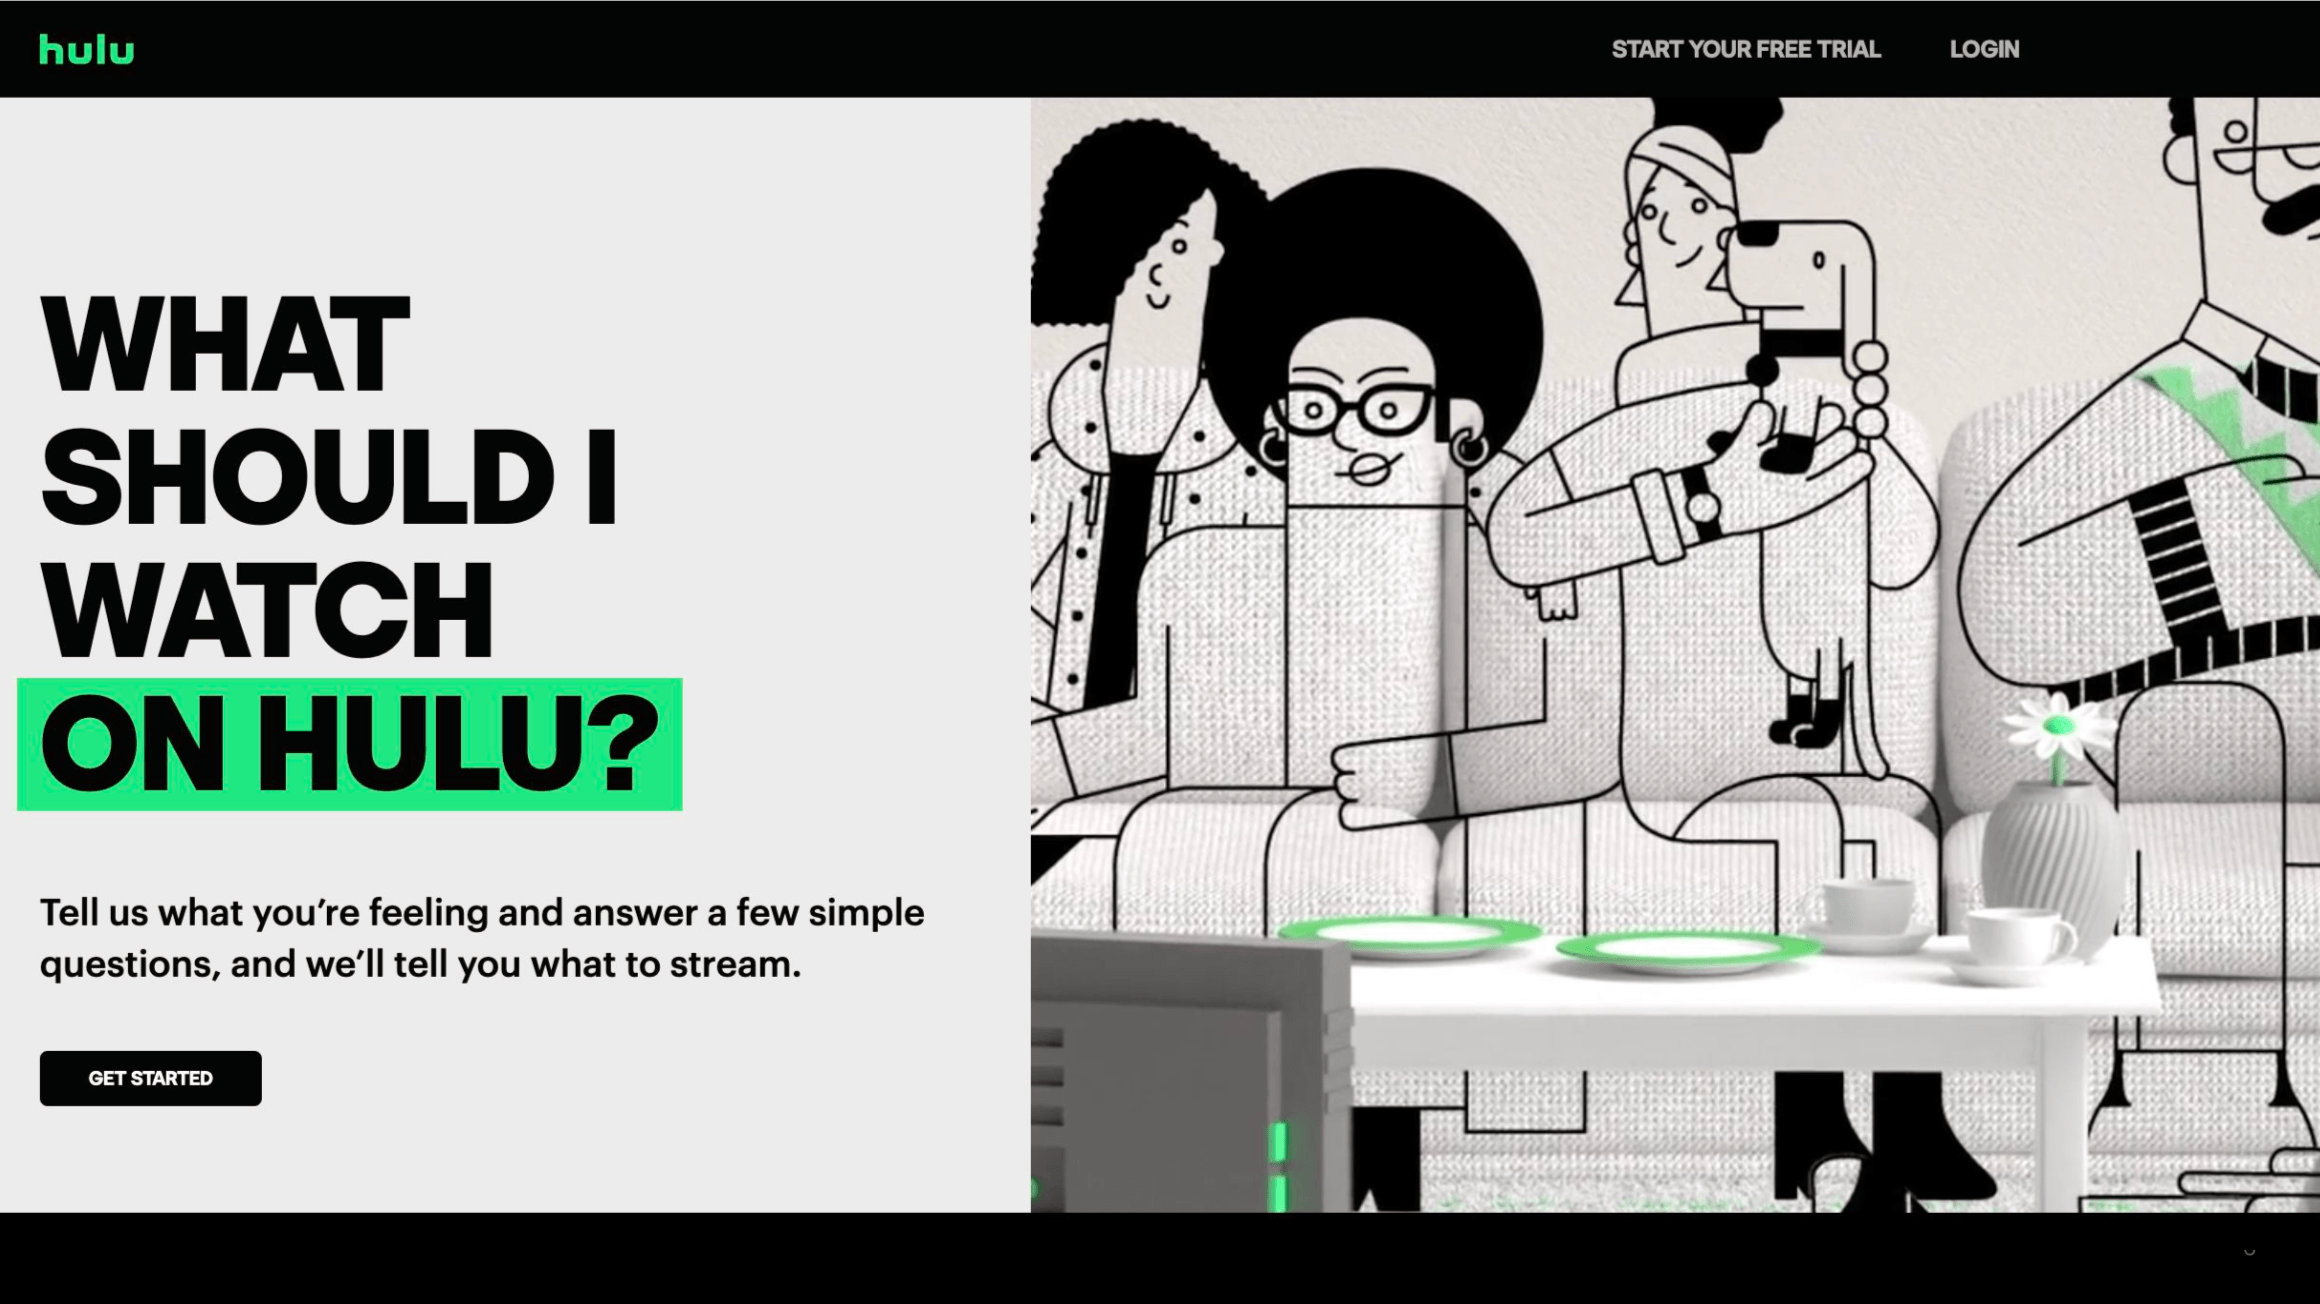 Take This Hulu Quiz to Find Your Next Show or Movie to Stream